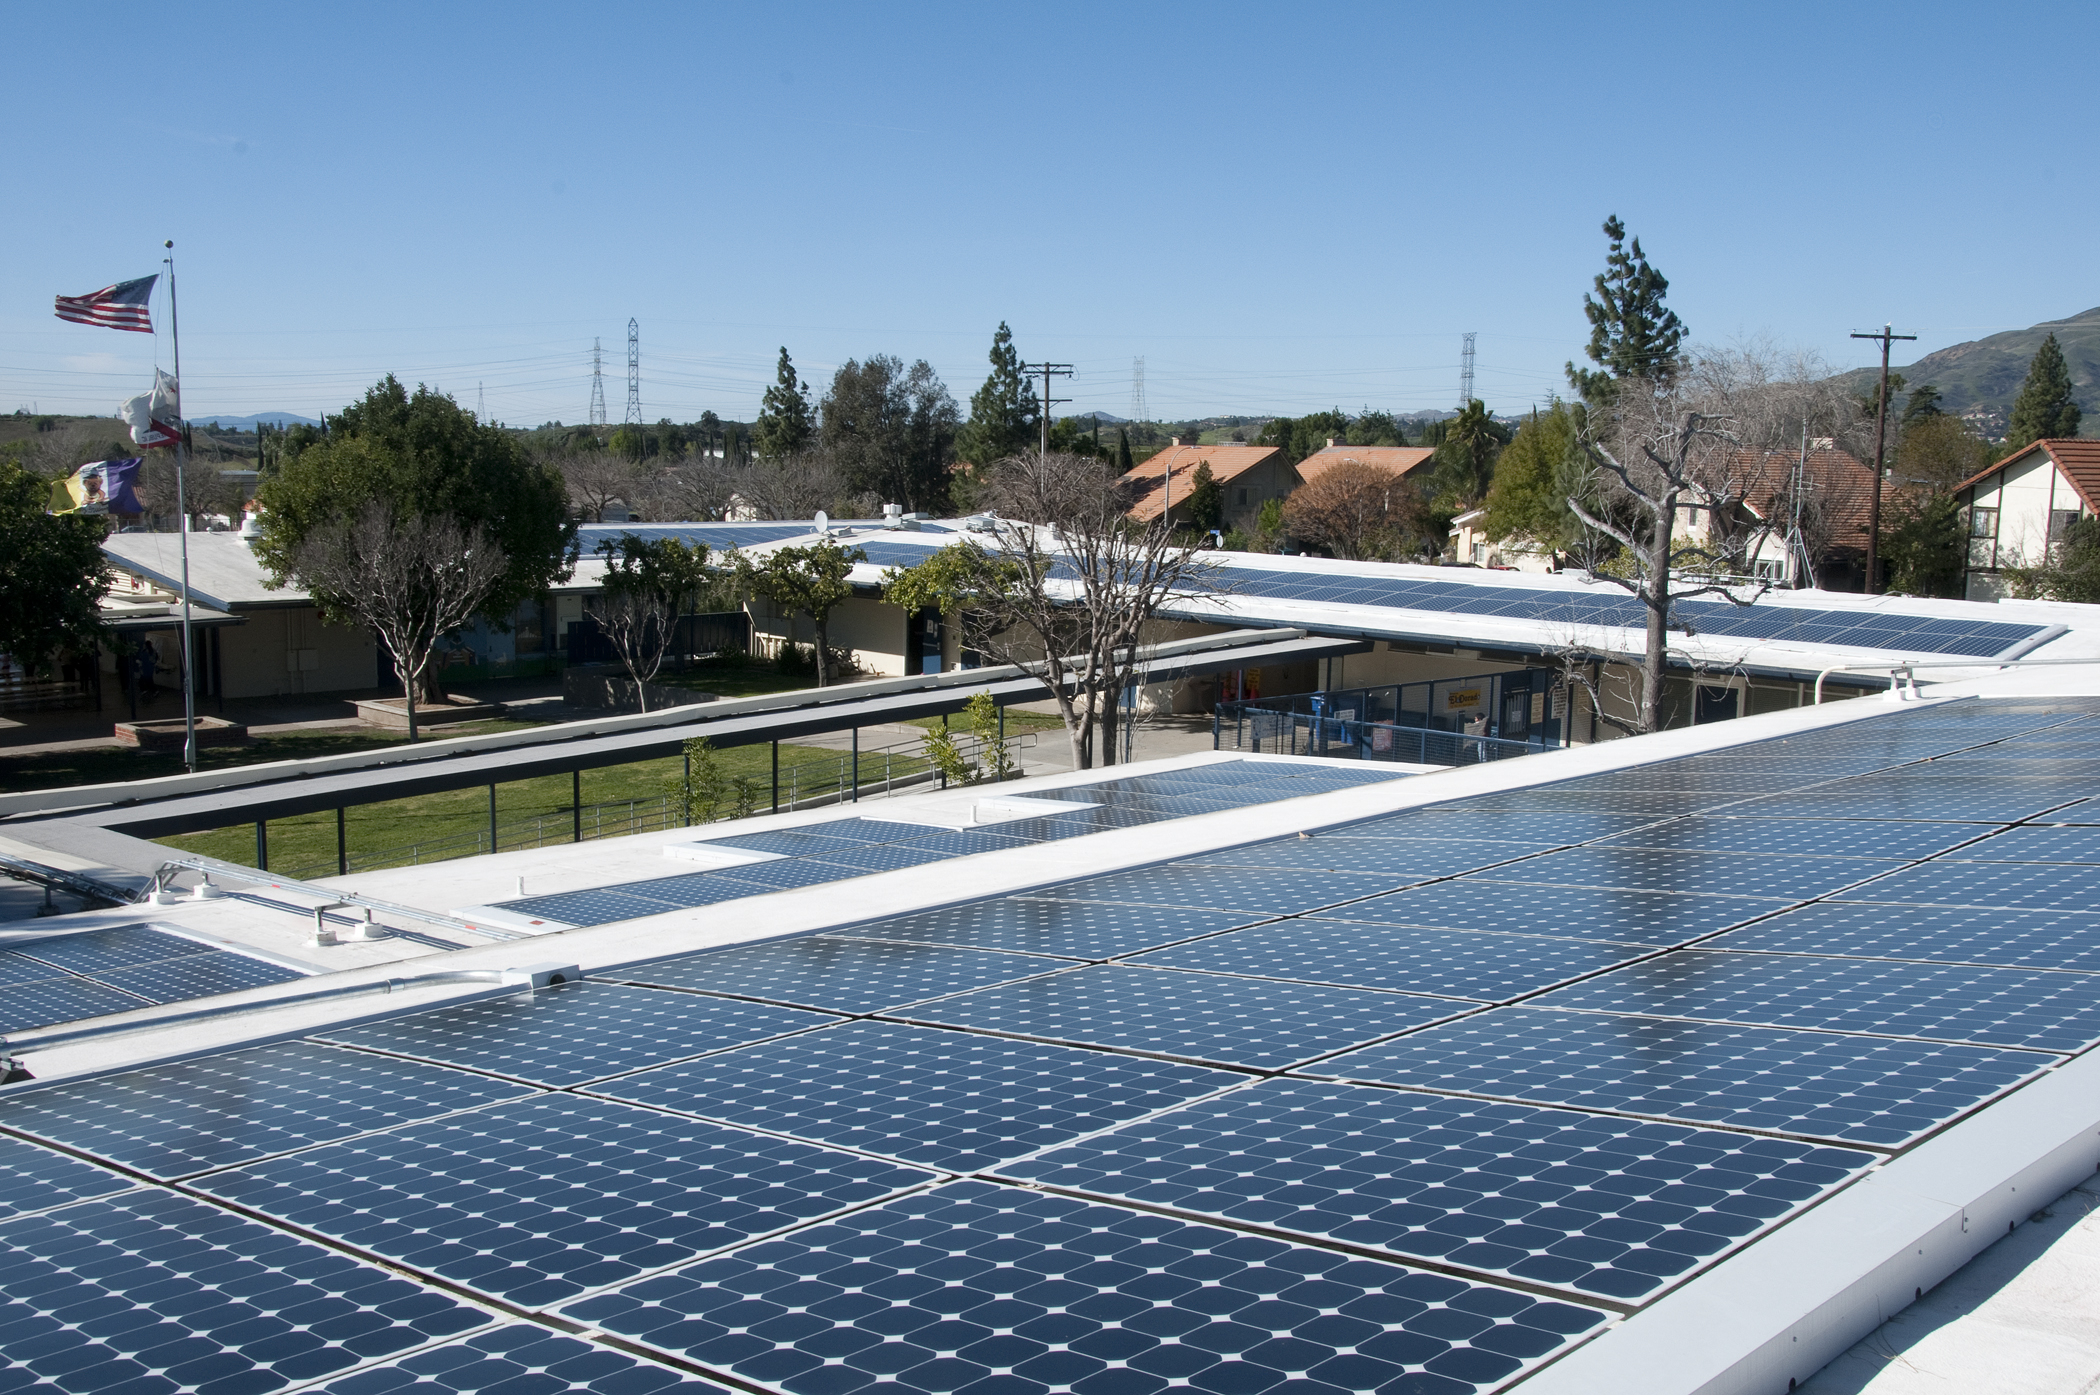 WHEN IT COMES TO THE EFFICIENCY AND QUALITY OF PRODUCTS,  SOLAR OPTIMUM DELIVERS THE GOODS!